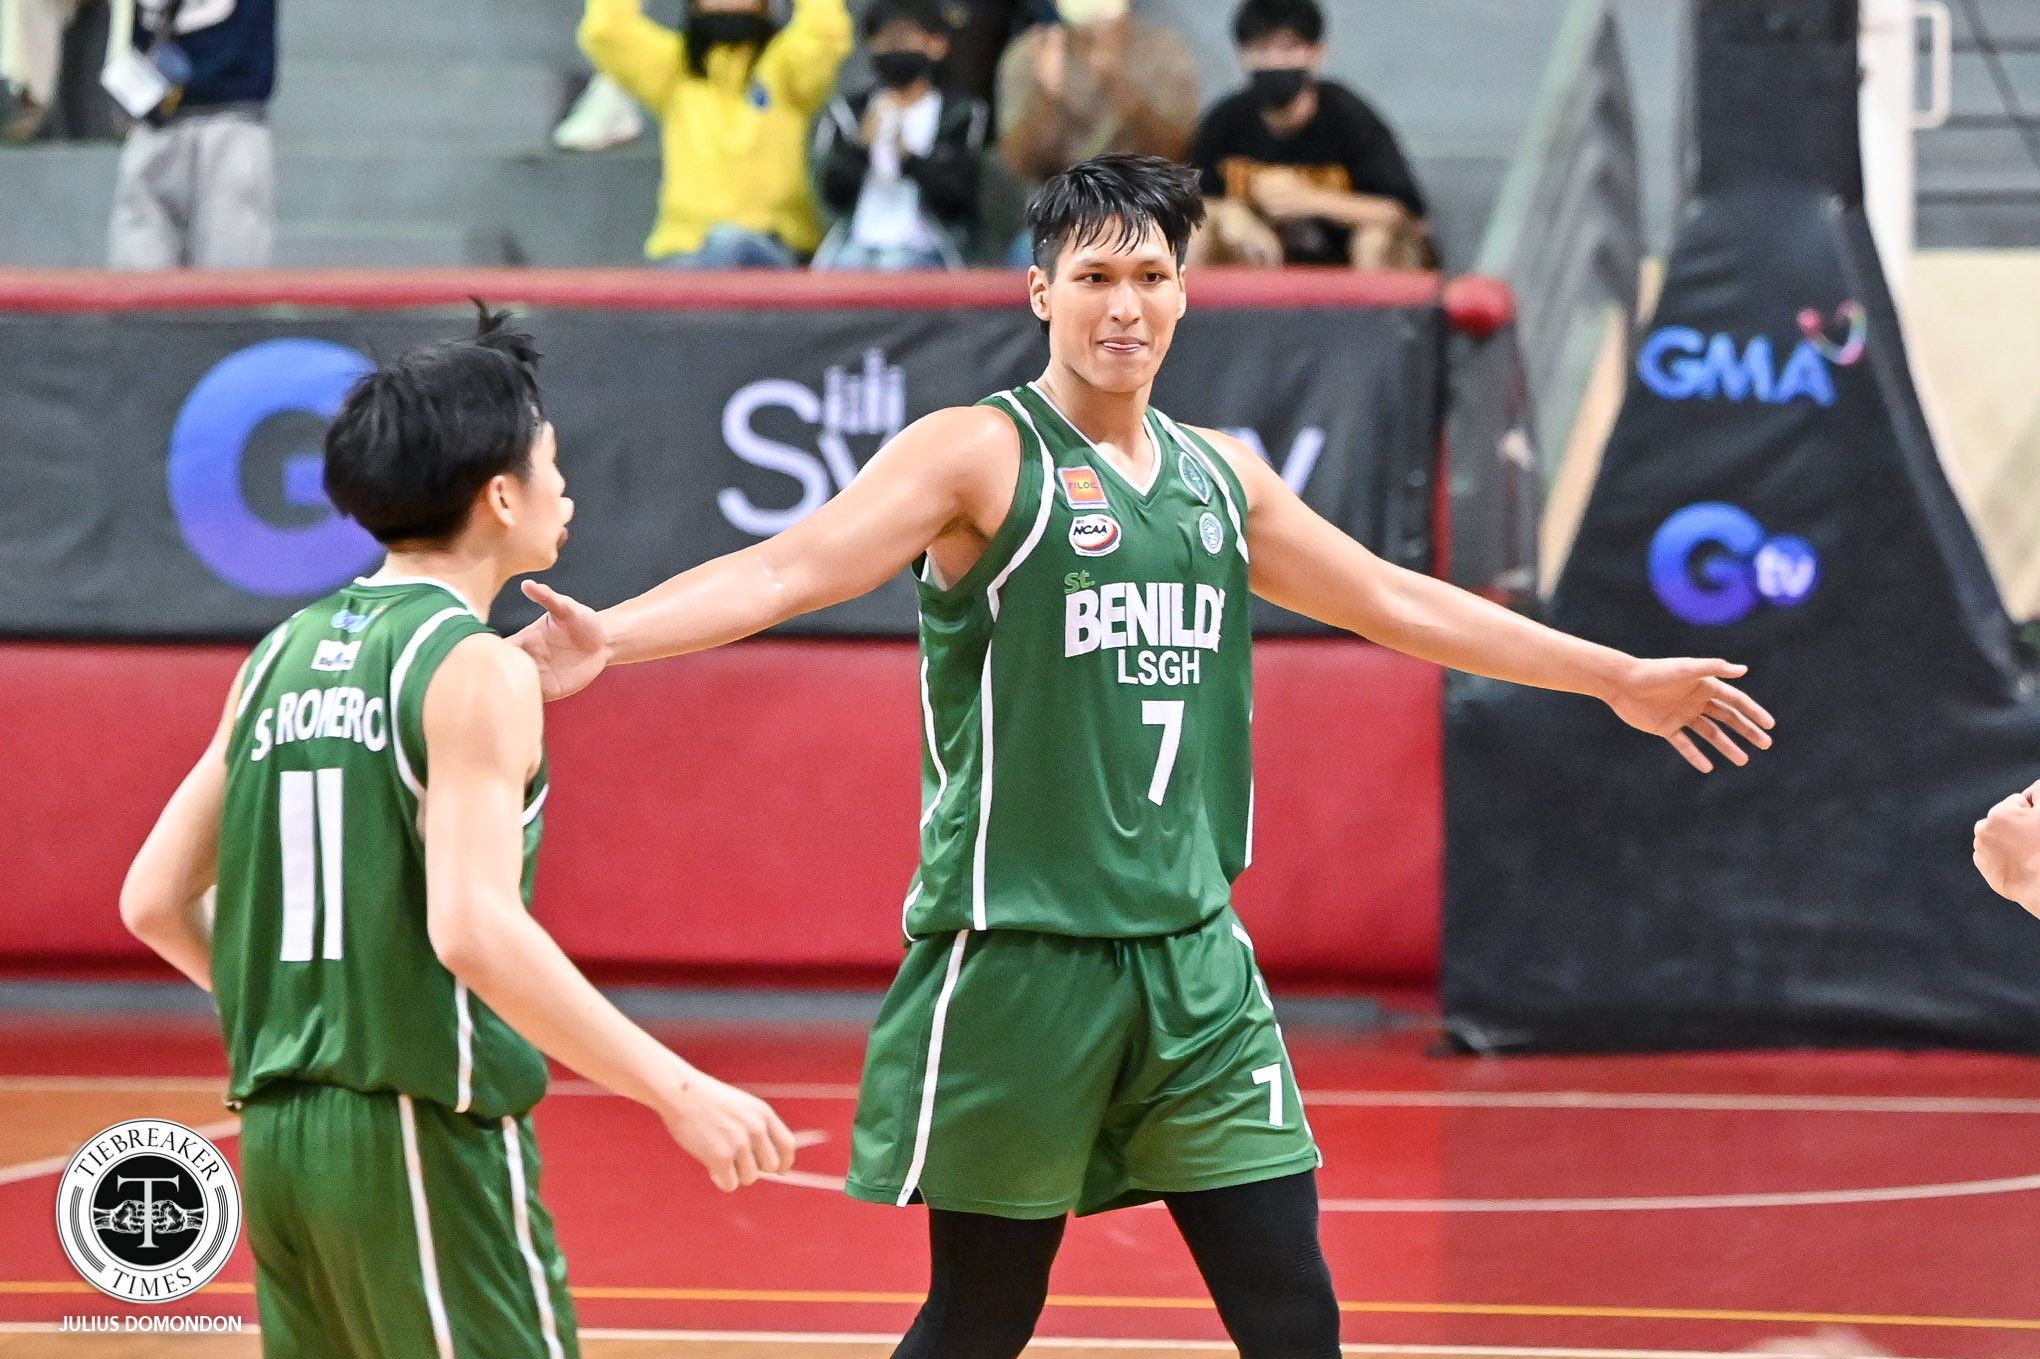 NCAA-Season-98-LSGH-vs-San-Beda-Seven-Gagate Gagate, Coronel to join Pablo in UP Basketball CSB NCAA News UAAP UP  - philippine sports news